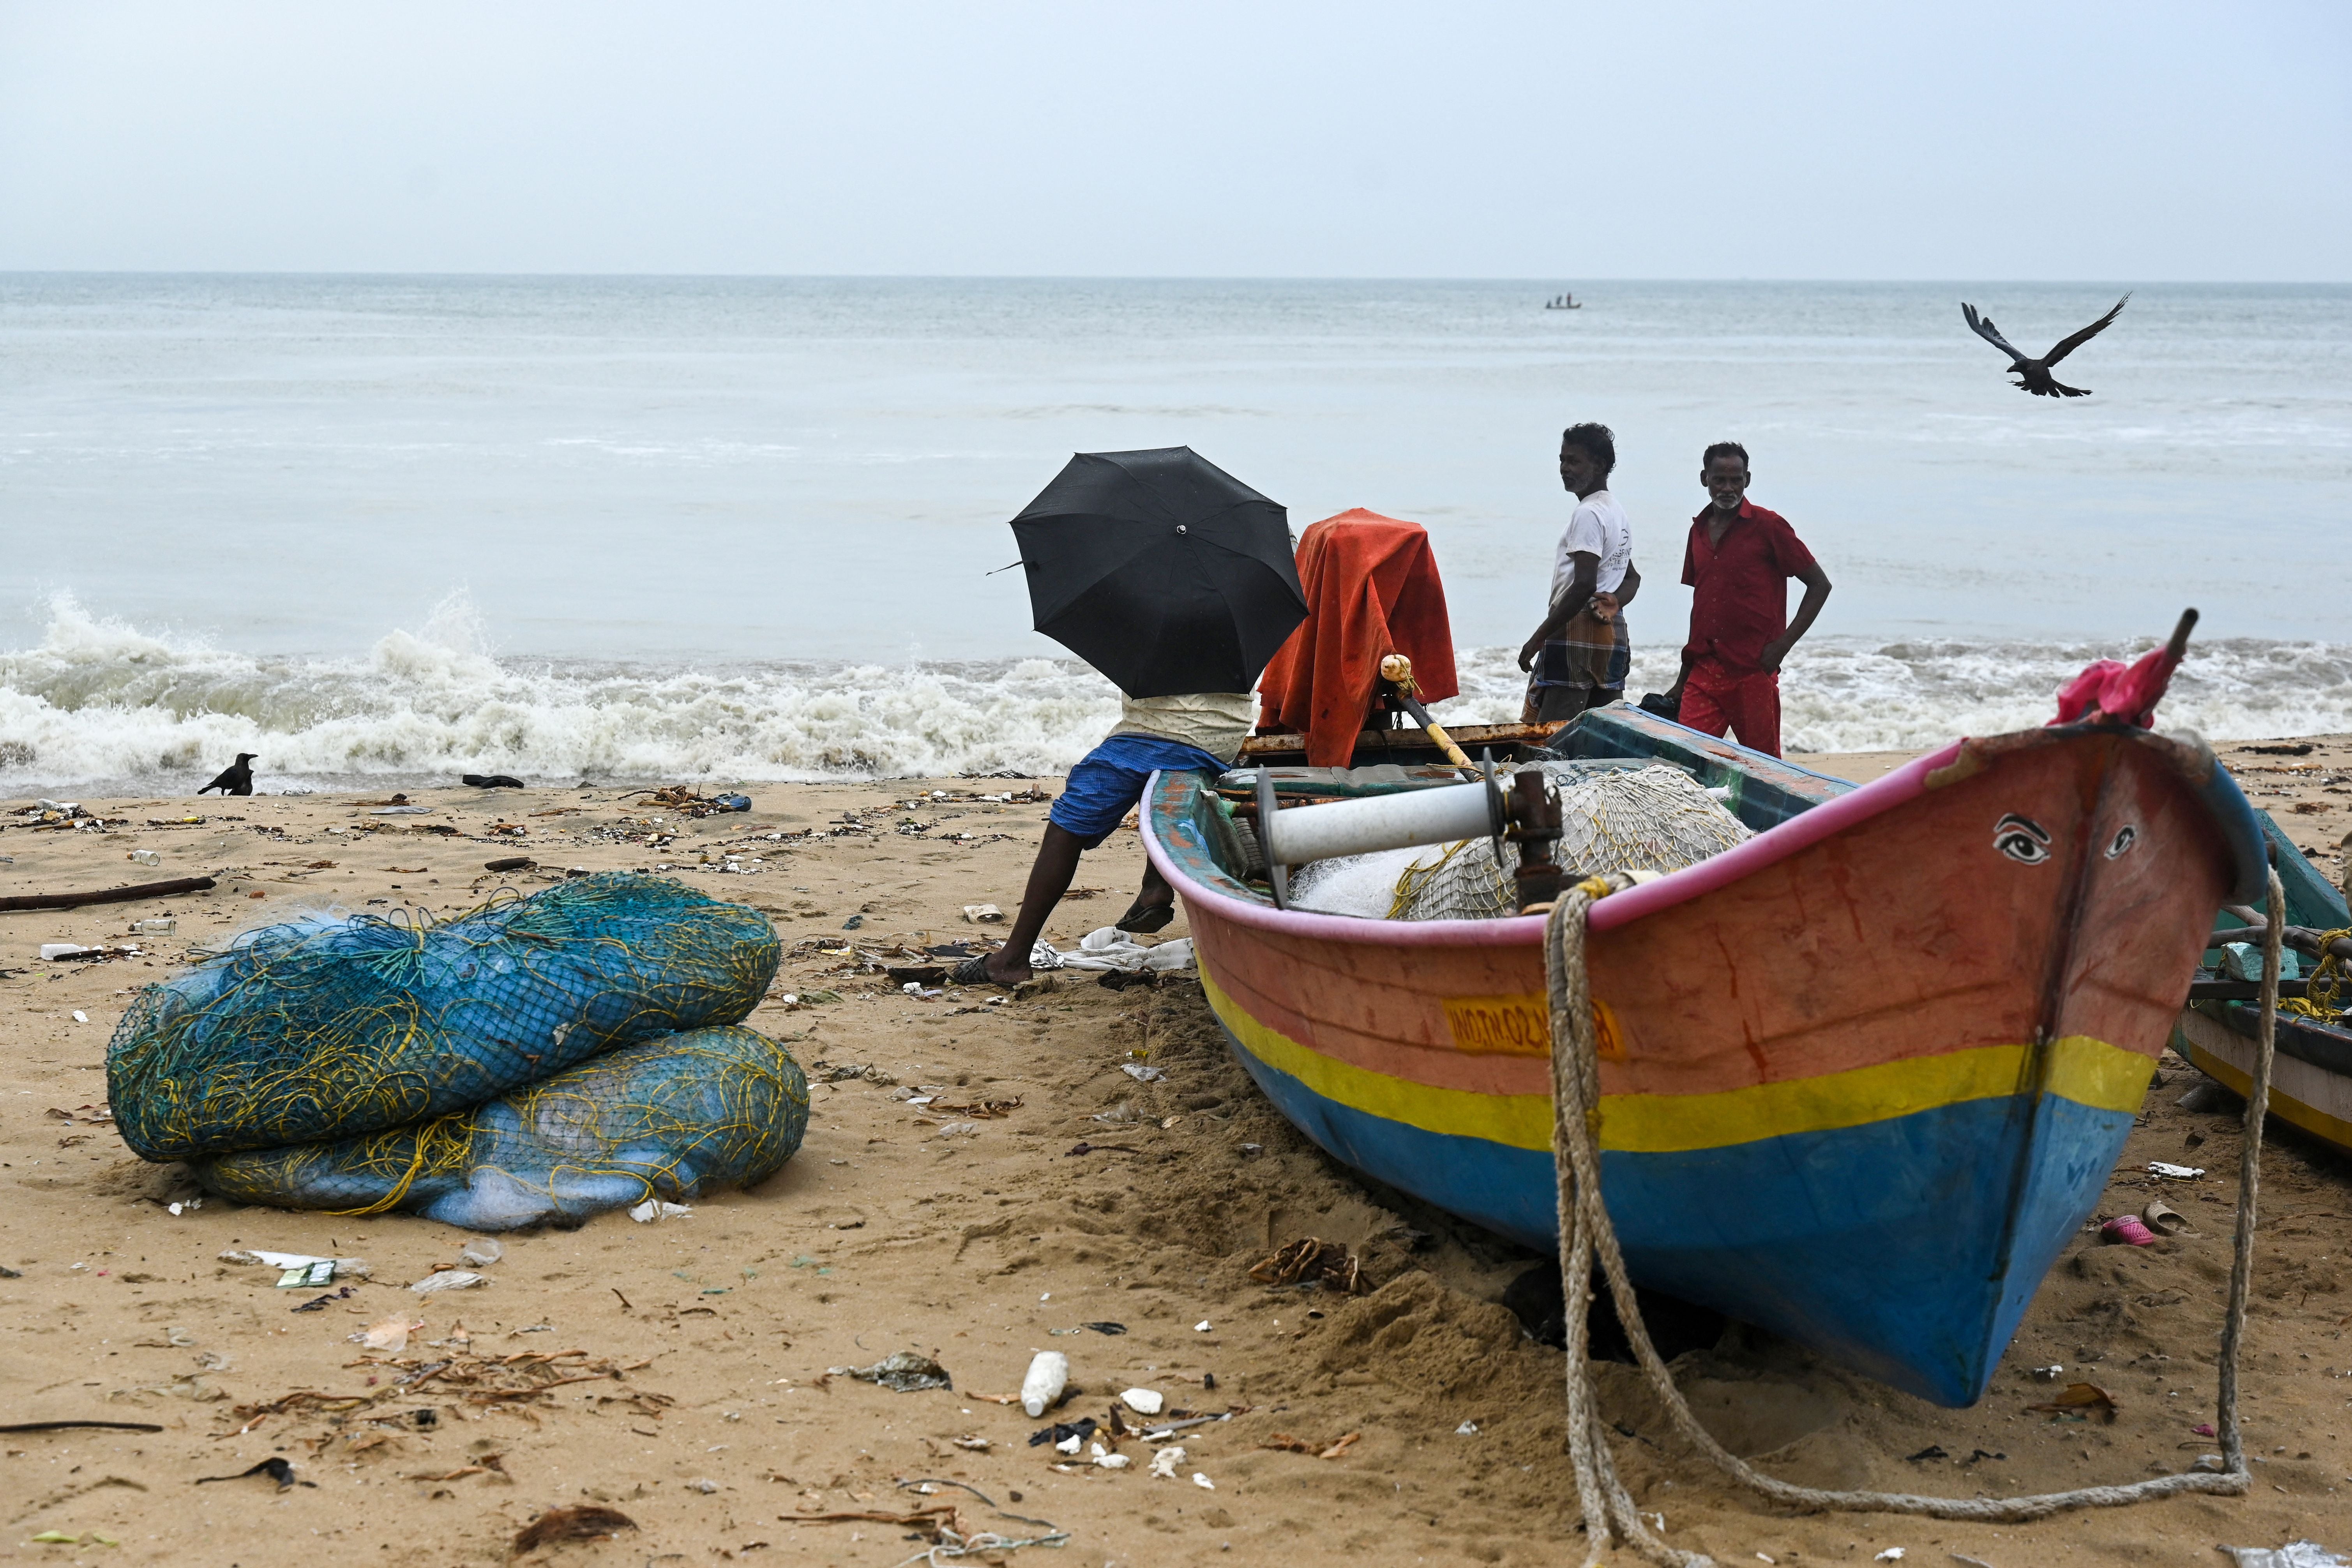 Indian fishermen who use the waters around Katchatheevu are predominently from Tamil Nadu